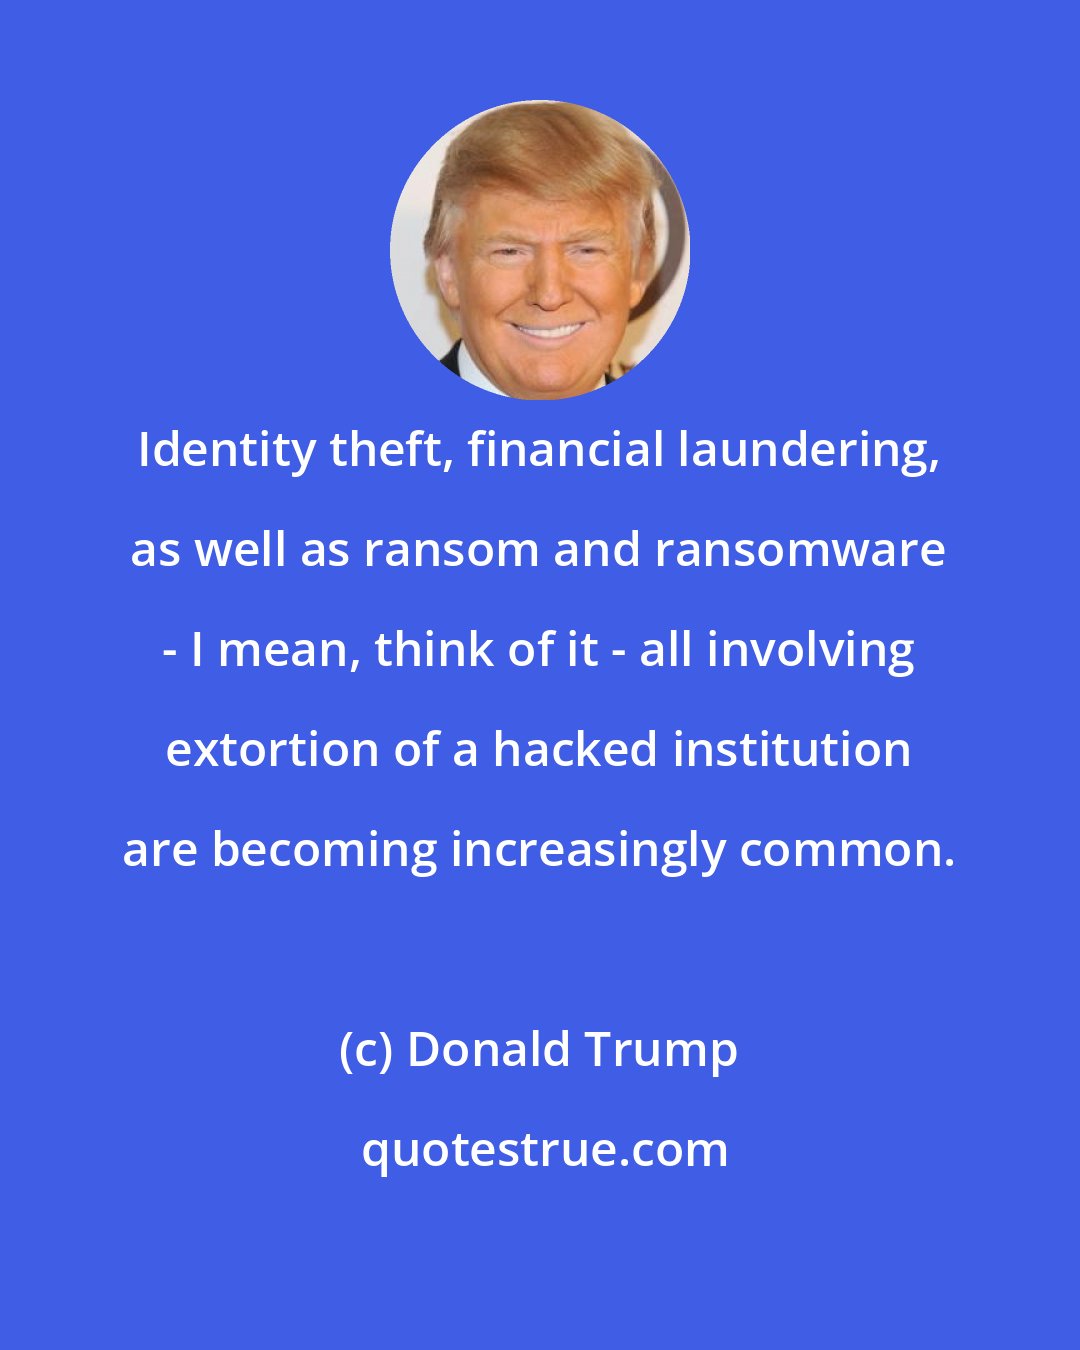 Donald Trump: Identity theft, financial laundering, as well as ransom and ransomware - I mean, think of it - all involving extortion of a hacked institution are becoming increasingly common.